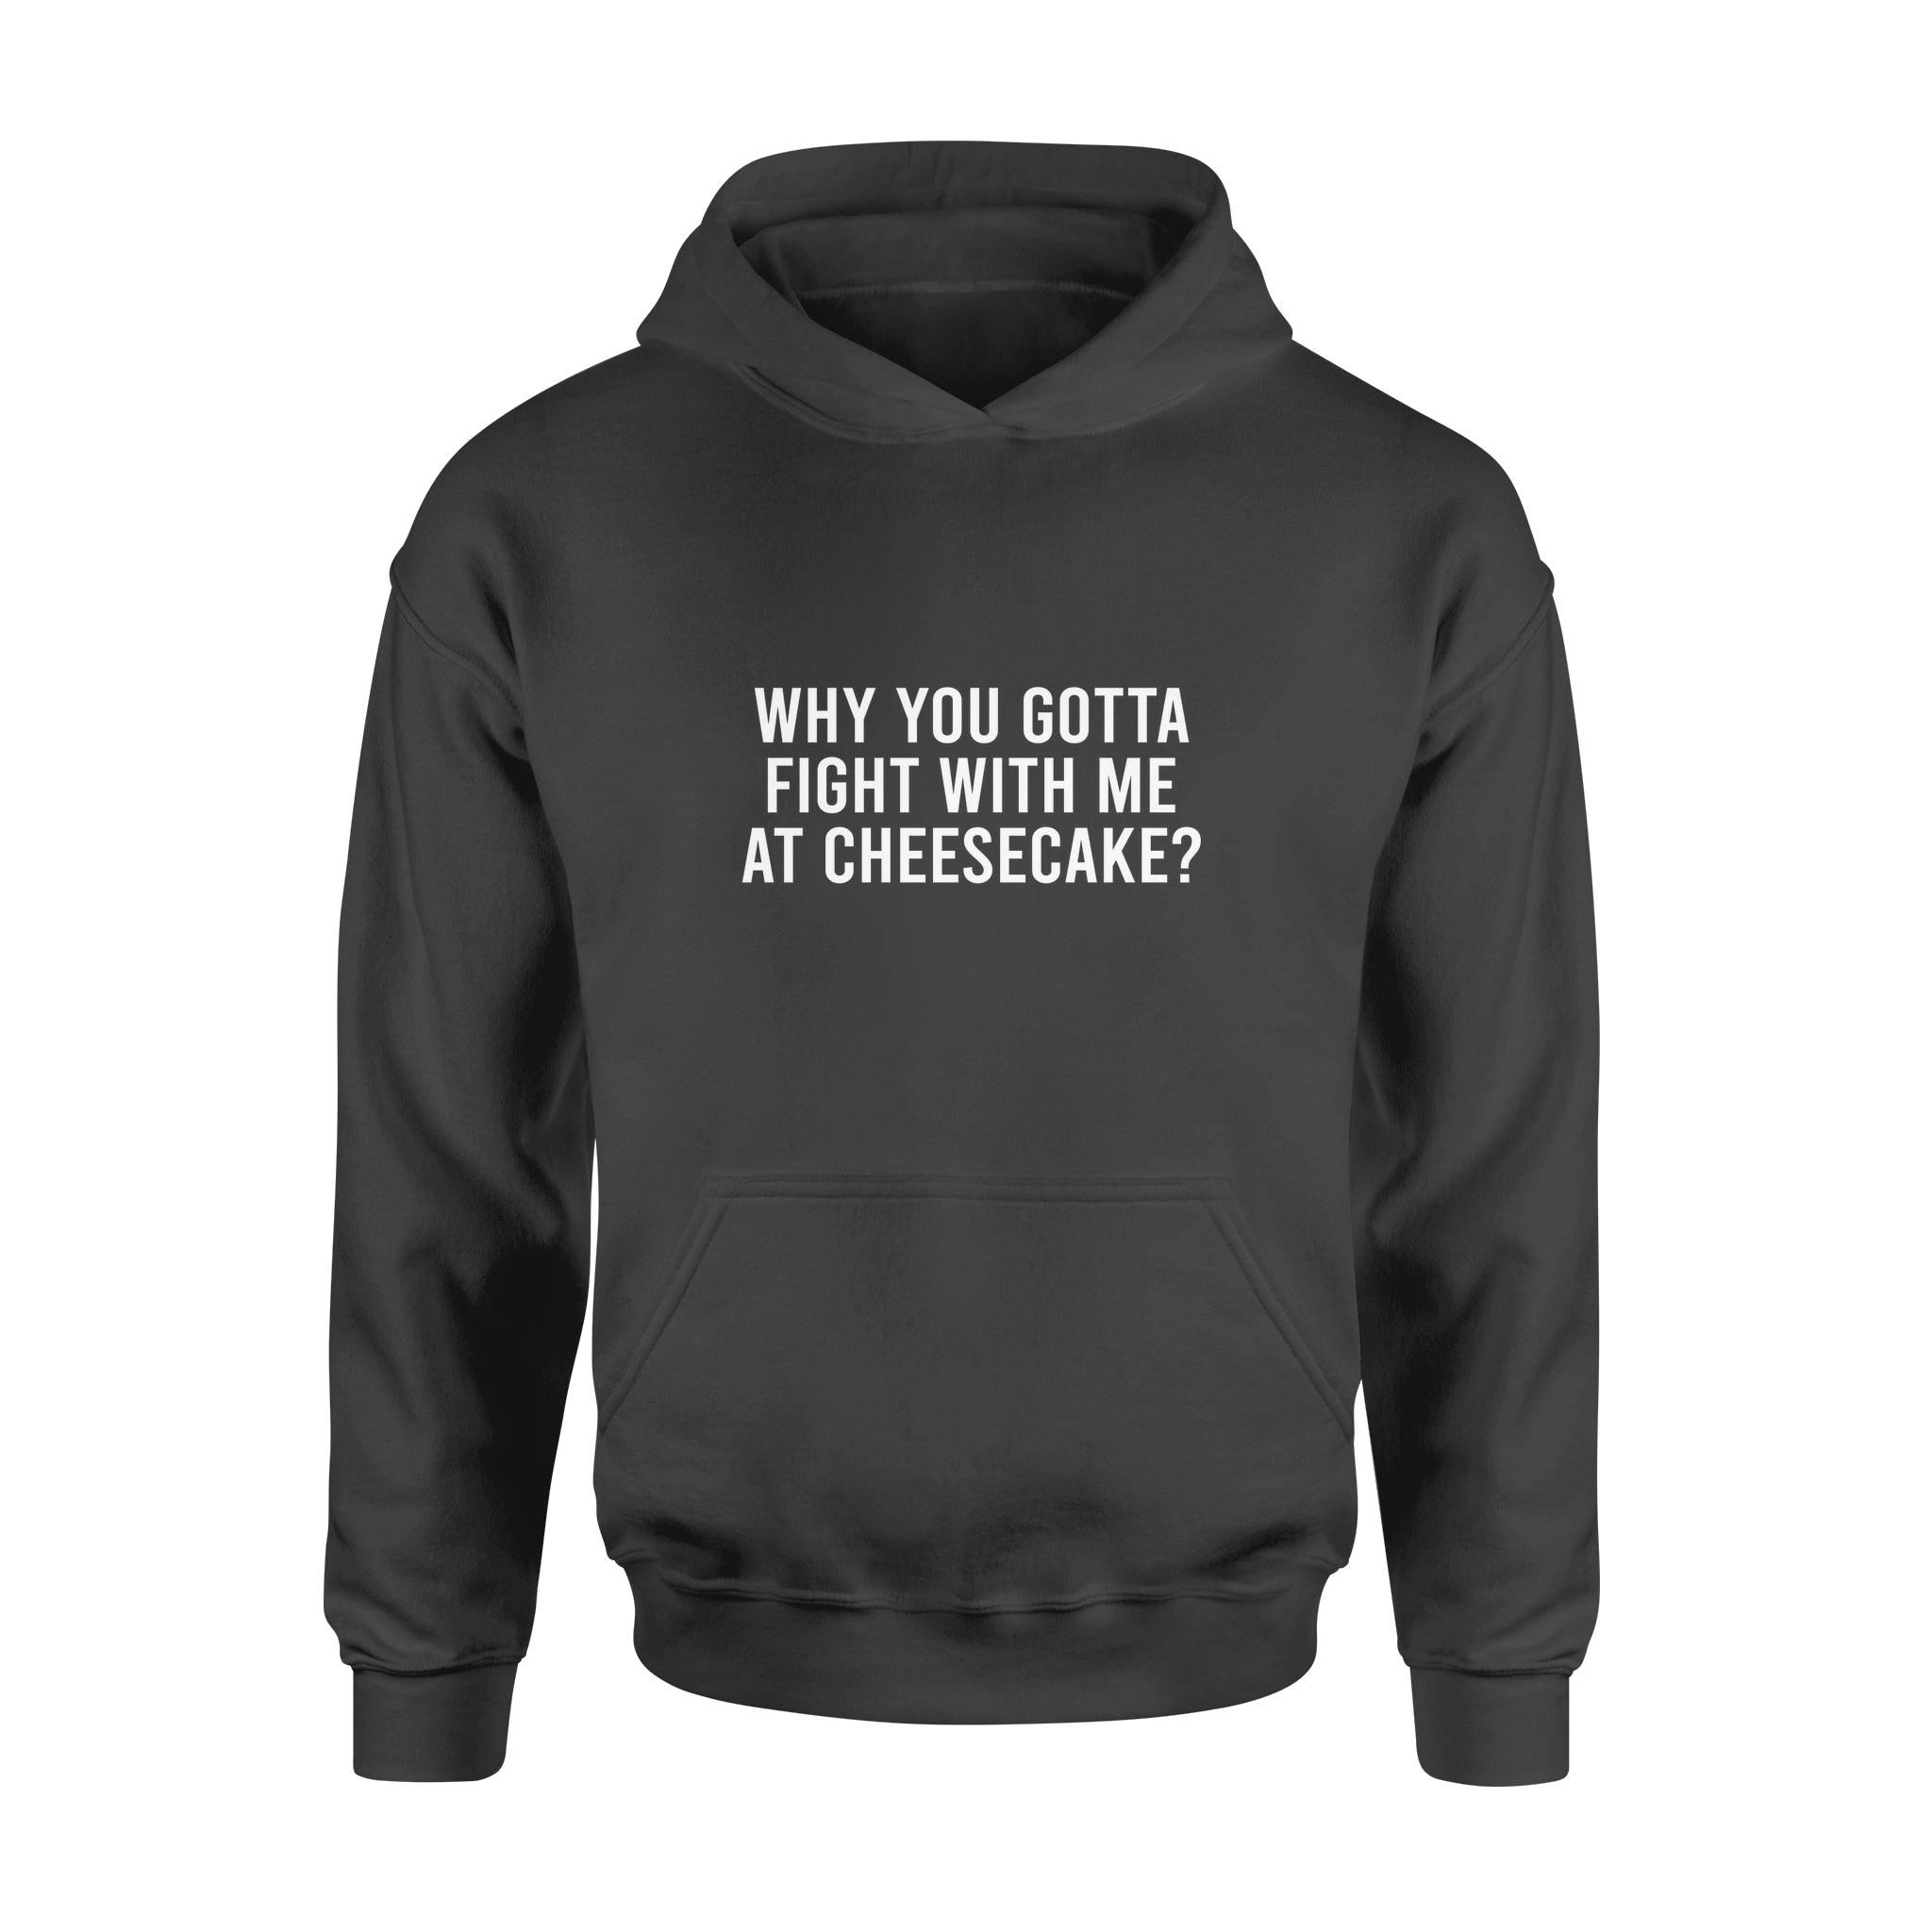 Why You Gotta Fight with me at Cheesecake - Standard Hoodie